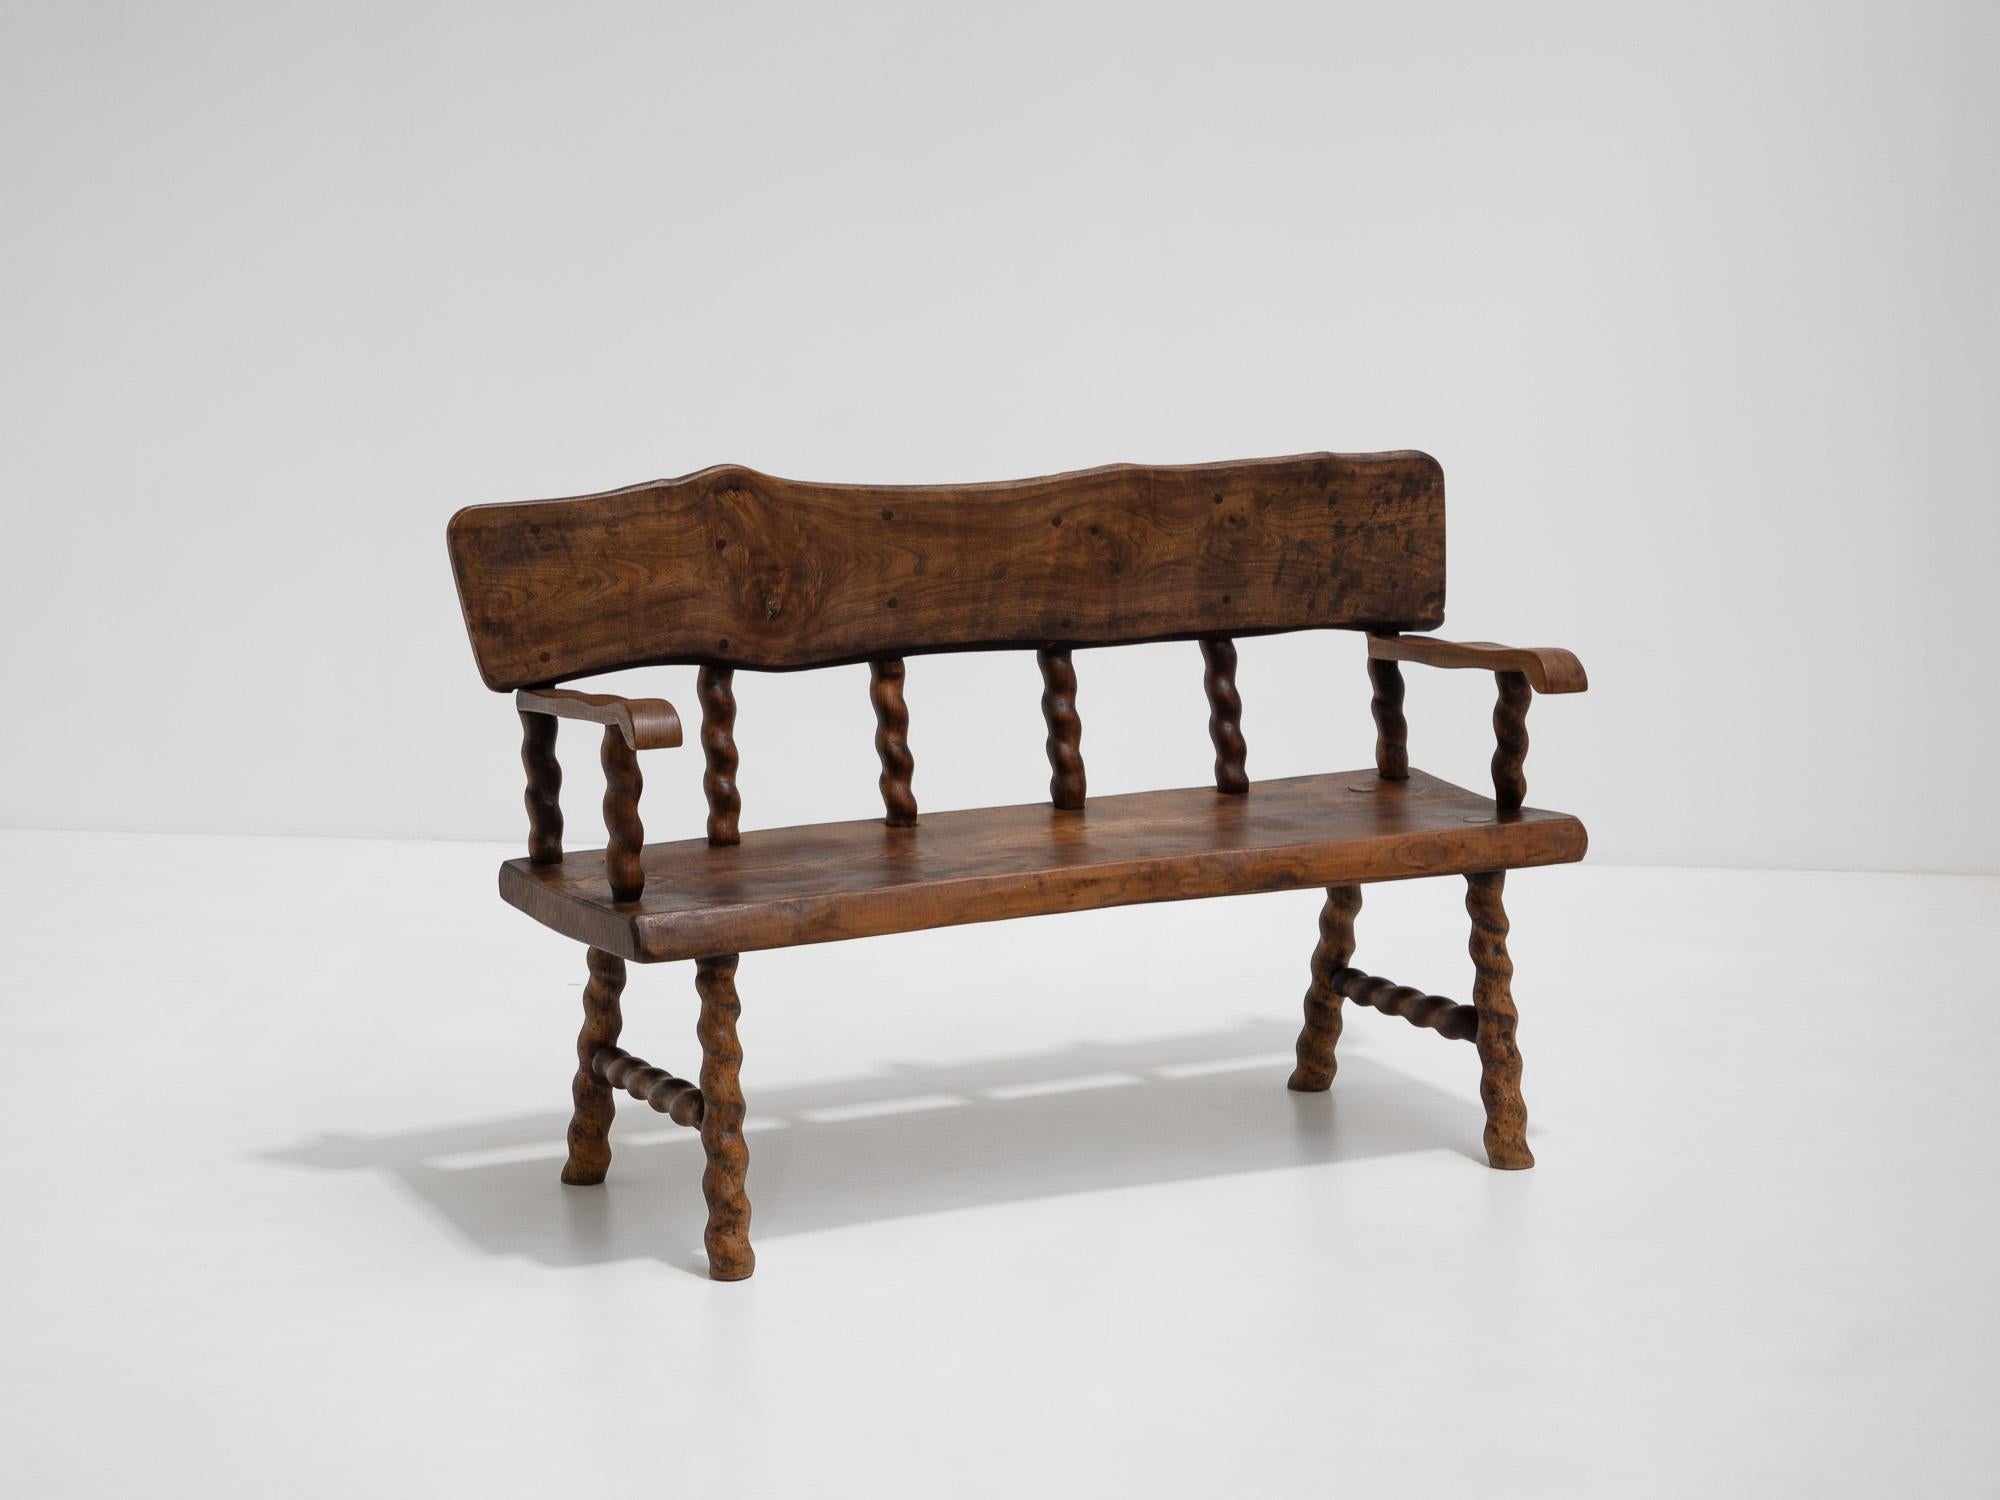 If you're looking for a unique bench that breaks away from traditional French designs, then this bench is the perfect choice for you. The bench dates back to the 1950s and this design era was known for both aesthetic and natural materials. The